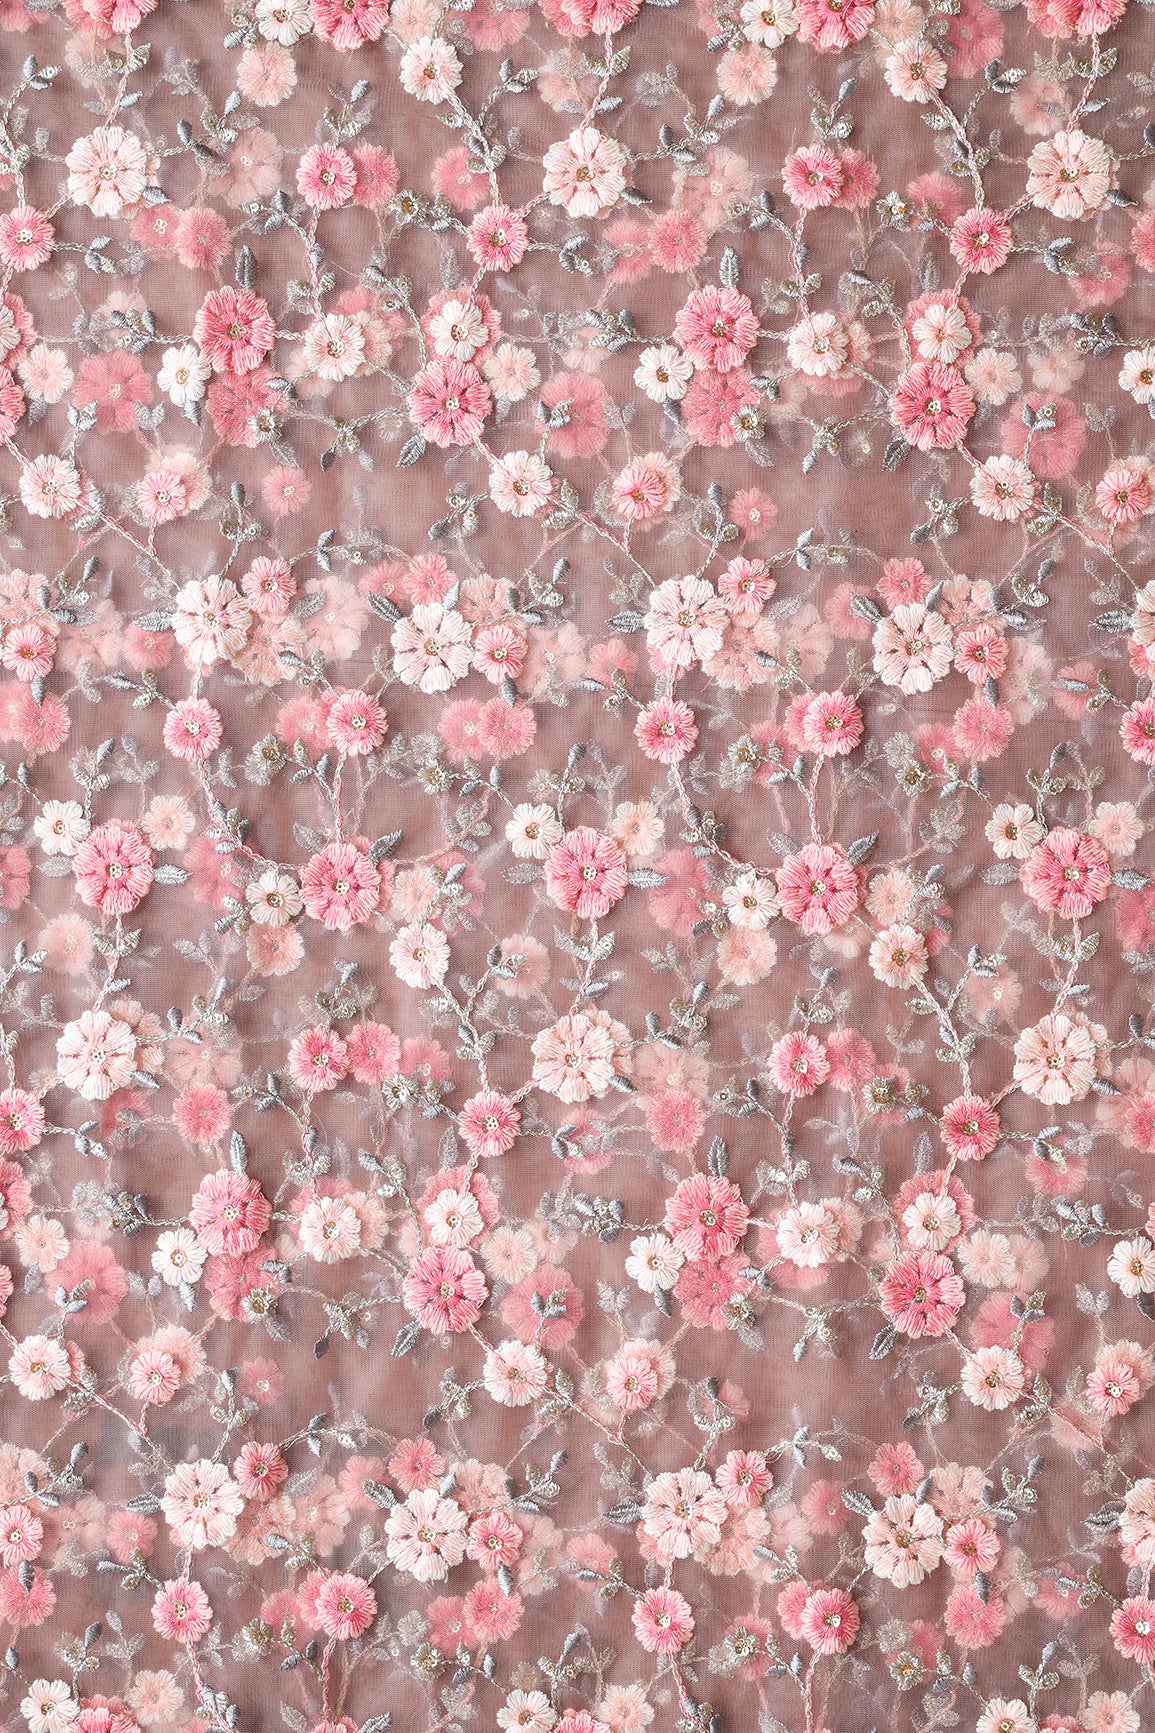 Pink And White Thread With Gold Sequins Floral Embroidery On Mauve Soft Net Fabric